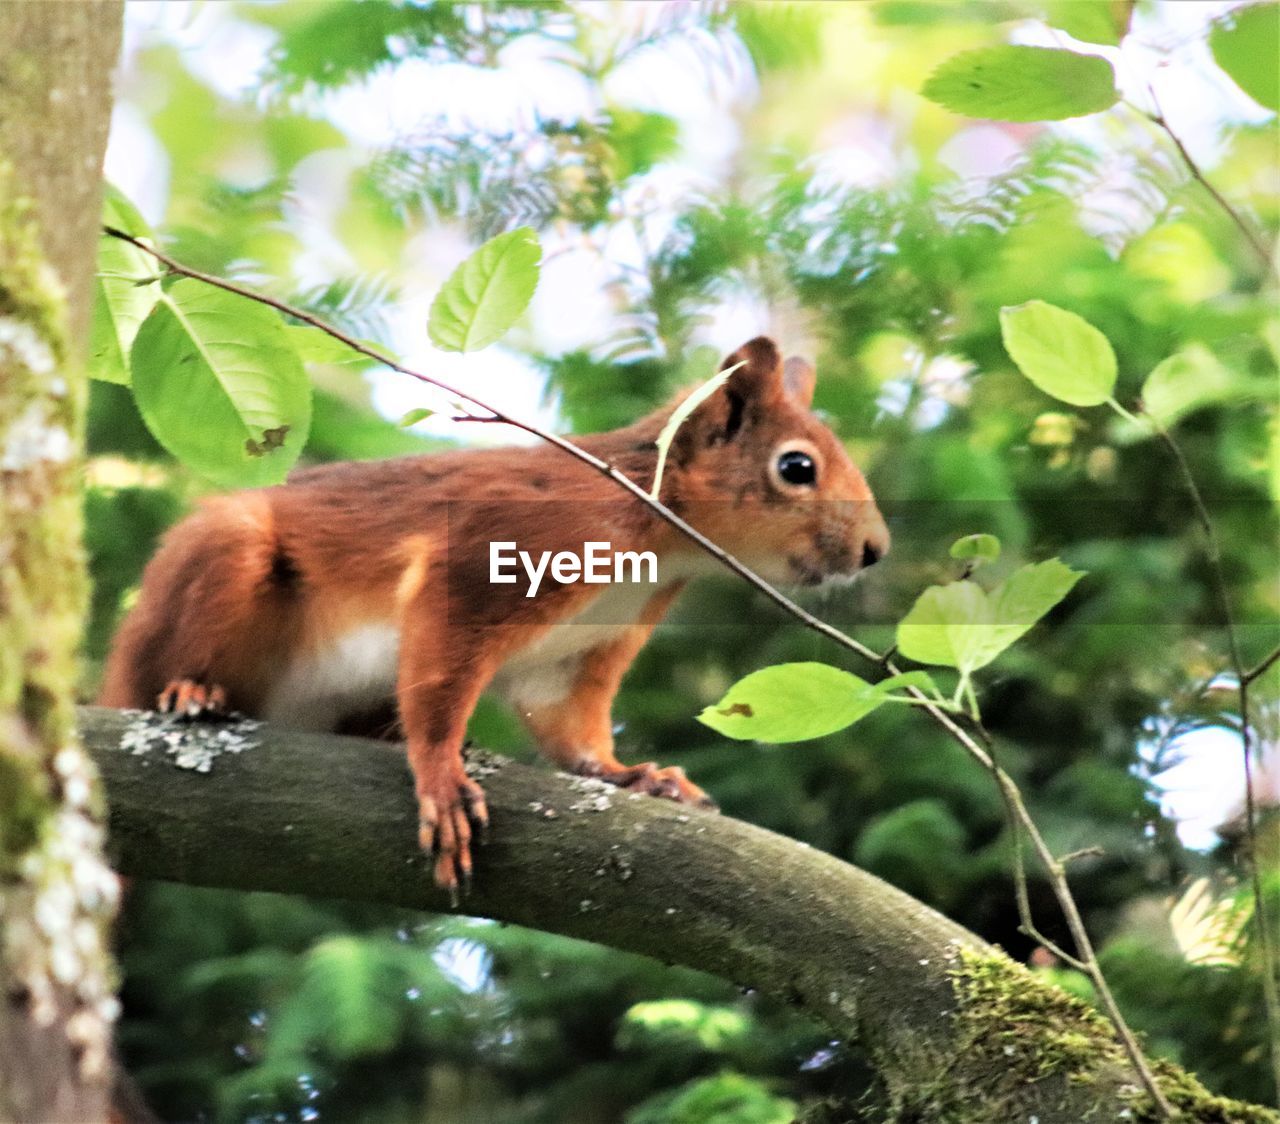 VIEW OF A SQUIRREL